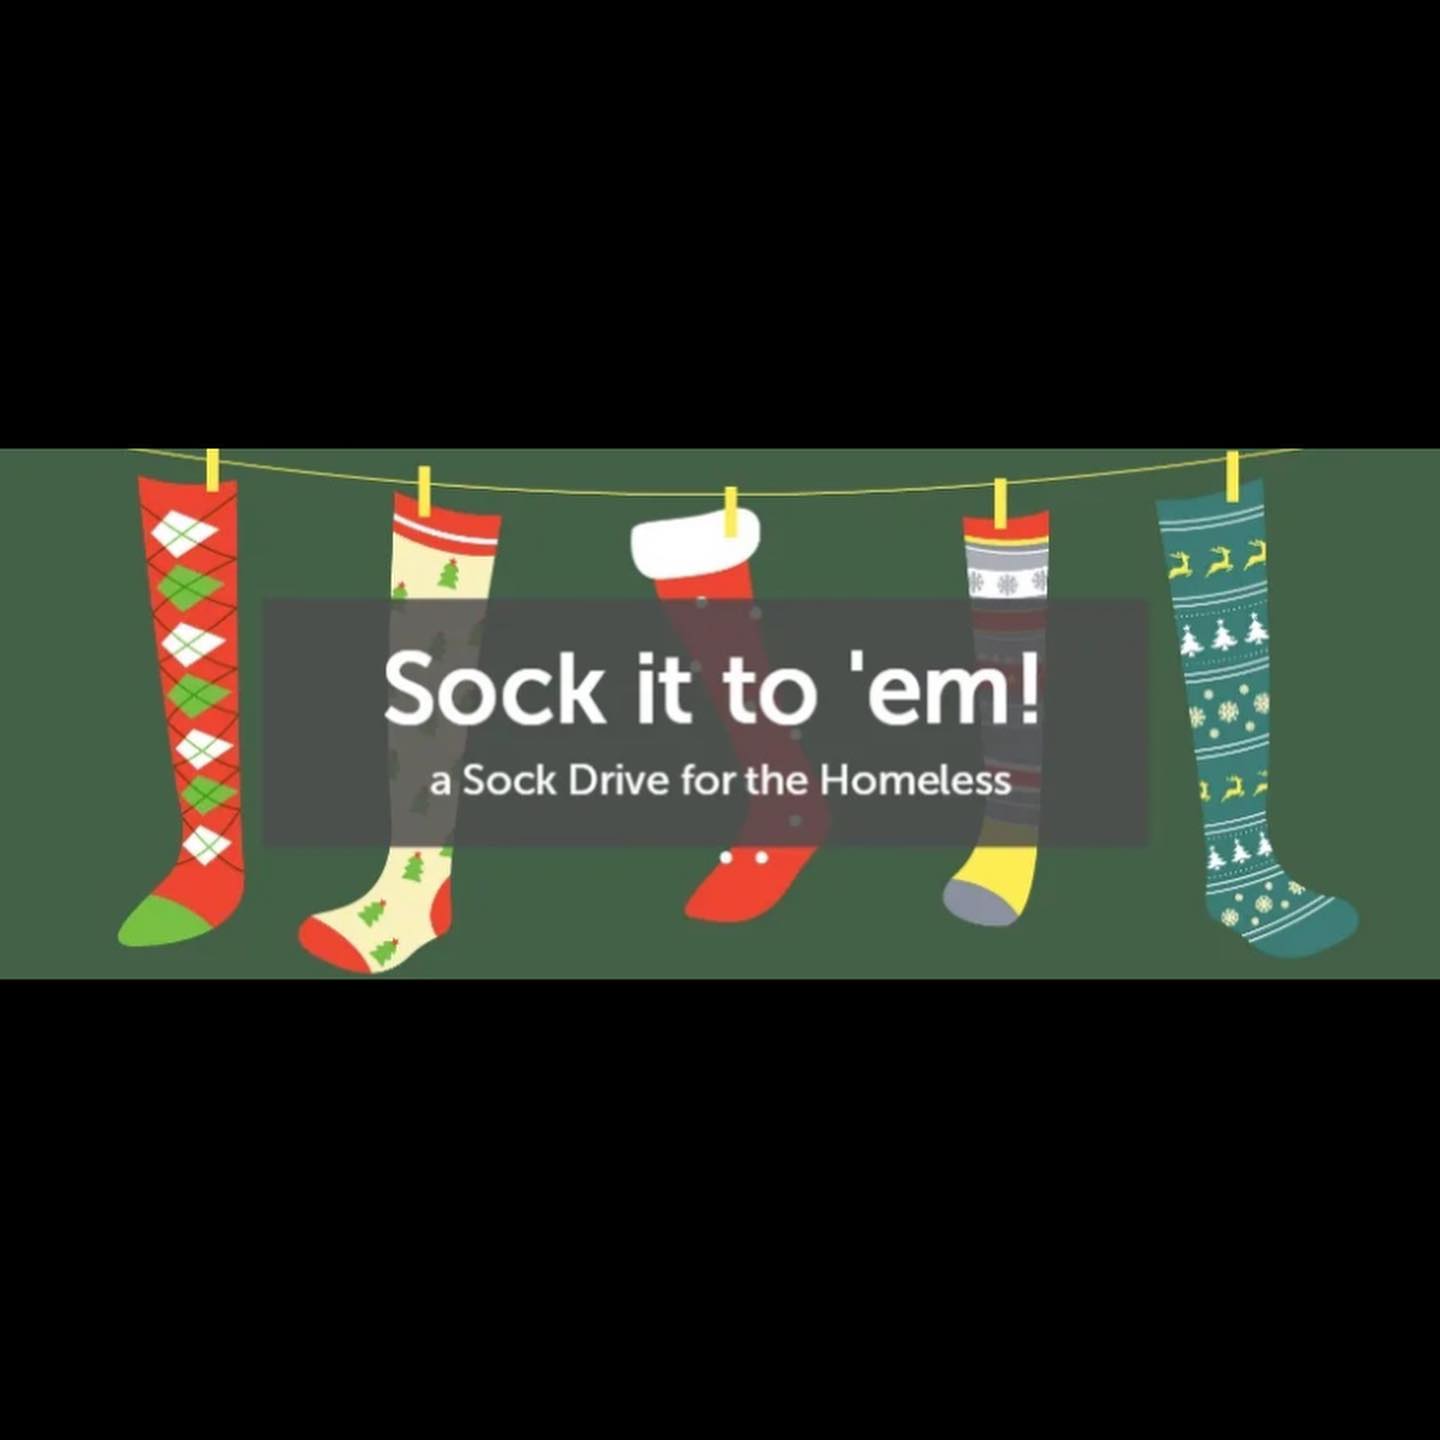 Collecting socks for toes in need🧦Socks wear out faster than any other clothing item and are the NUMBER ONE needed and least donated item for our homeless brothers and sisters. @fallbrookvineyardchurch is collecting new, preferably colored socks until Jan 15. #sockdrive #sockittoem #warmheartswarmfeet